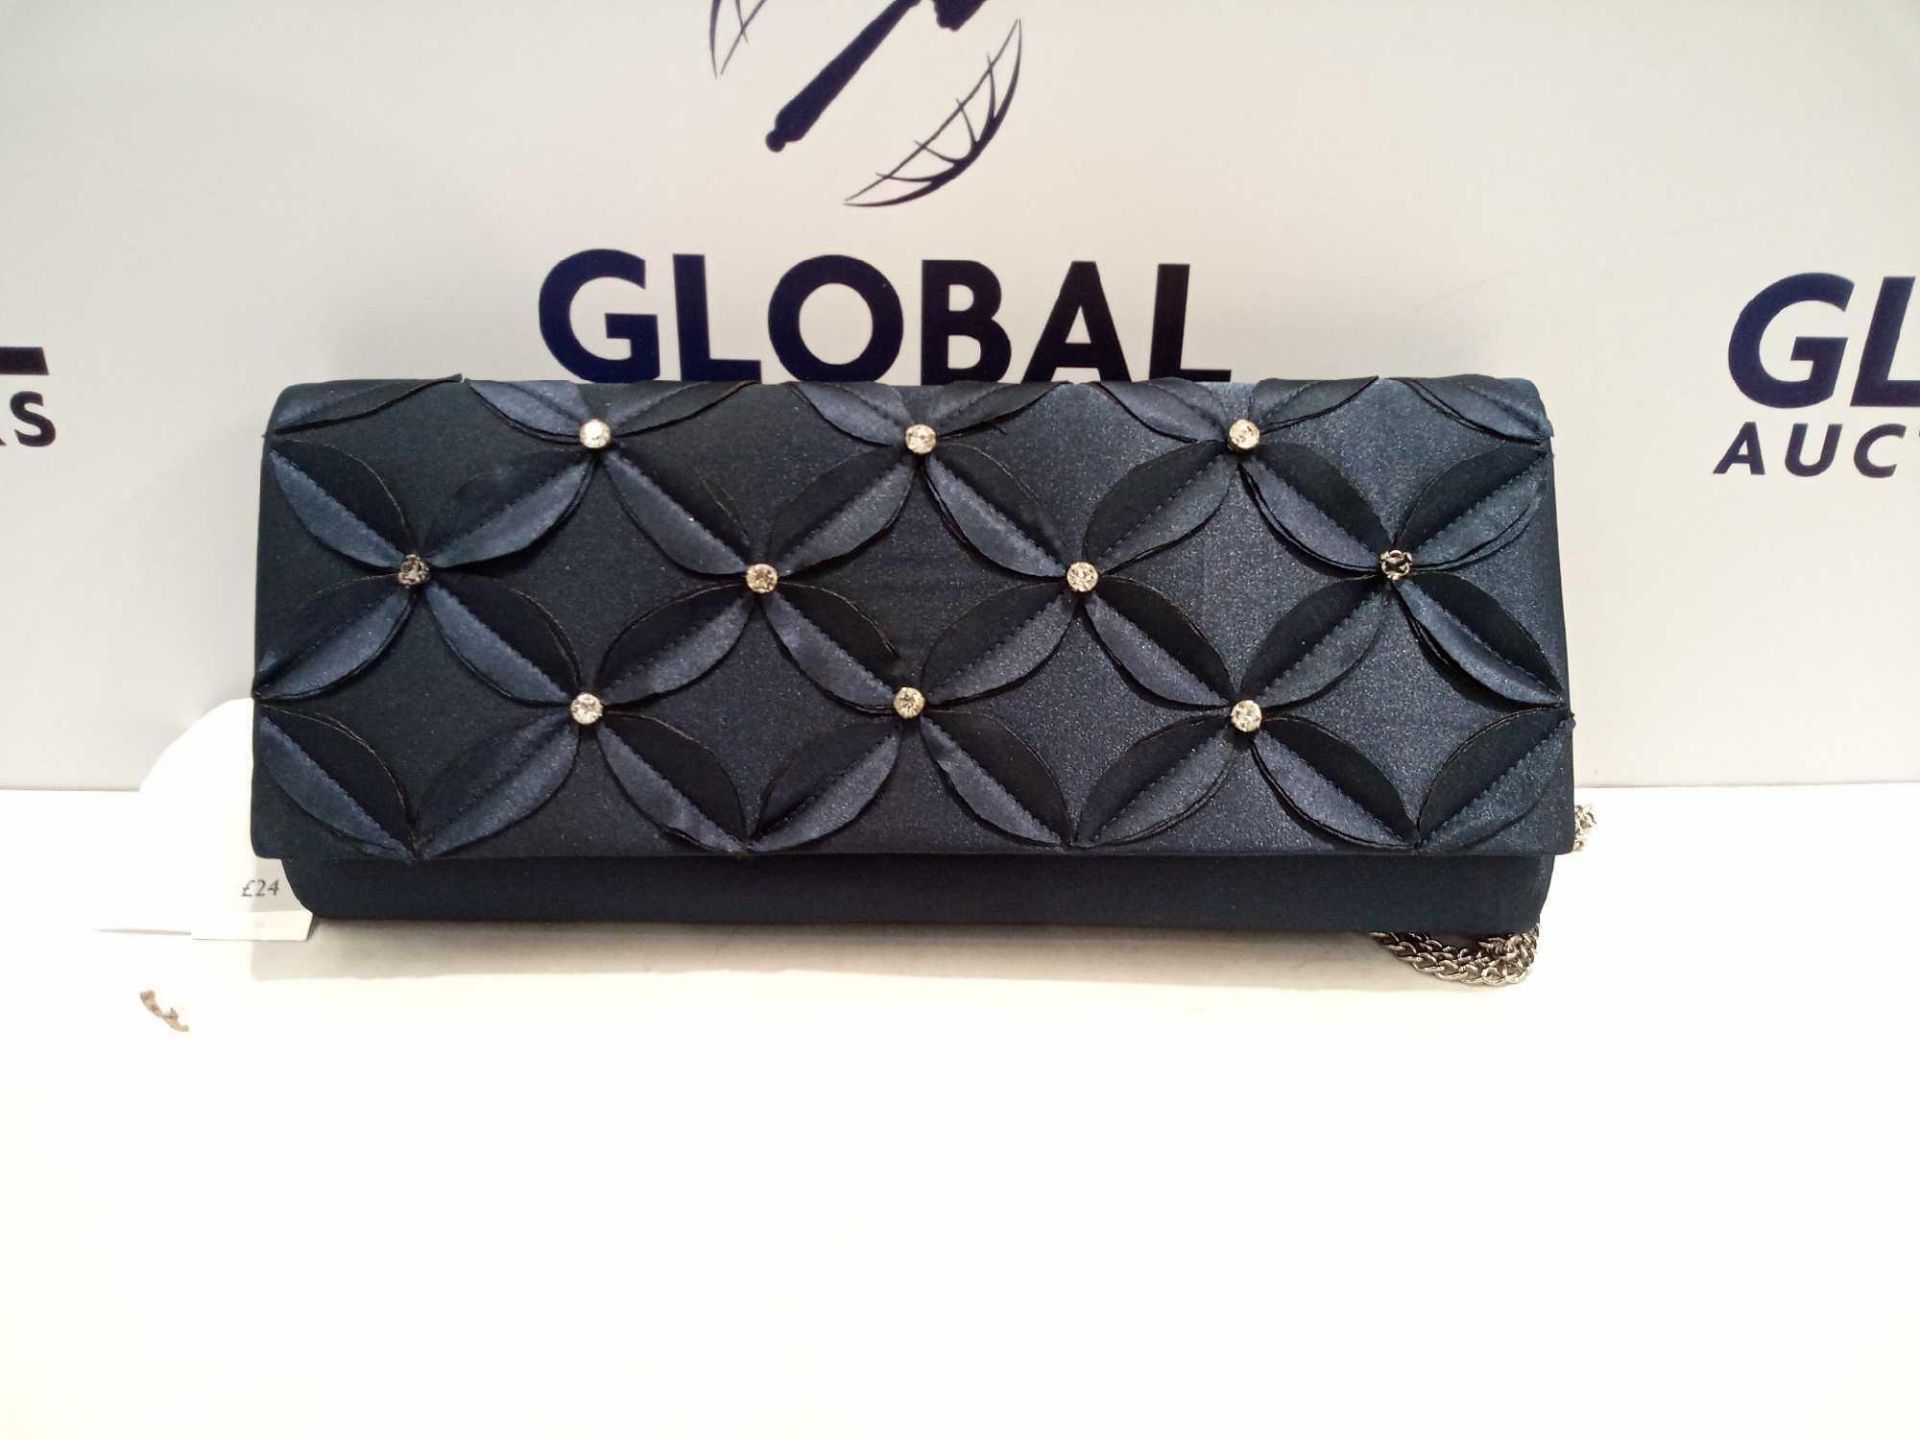 Rrp £50 Lot To Contain 2 Assorted Bags To Include A Navy Suede Clutch Bag And A Black Leather Hold I